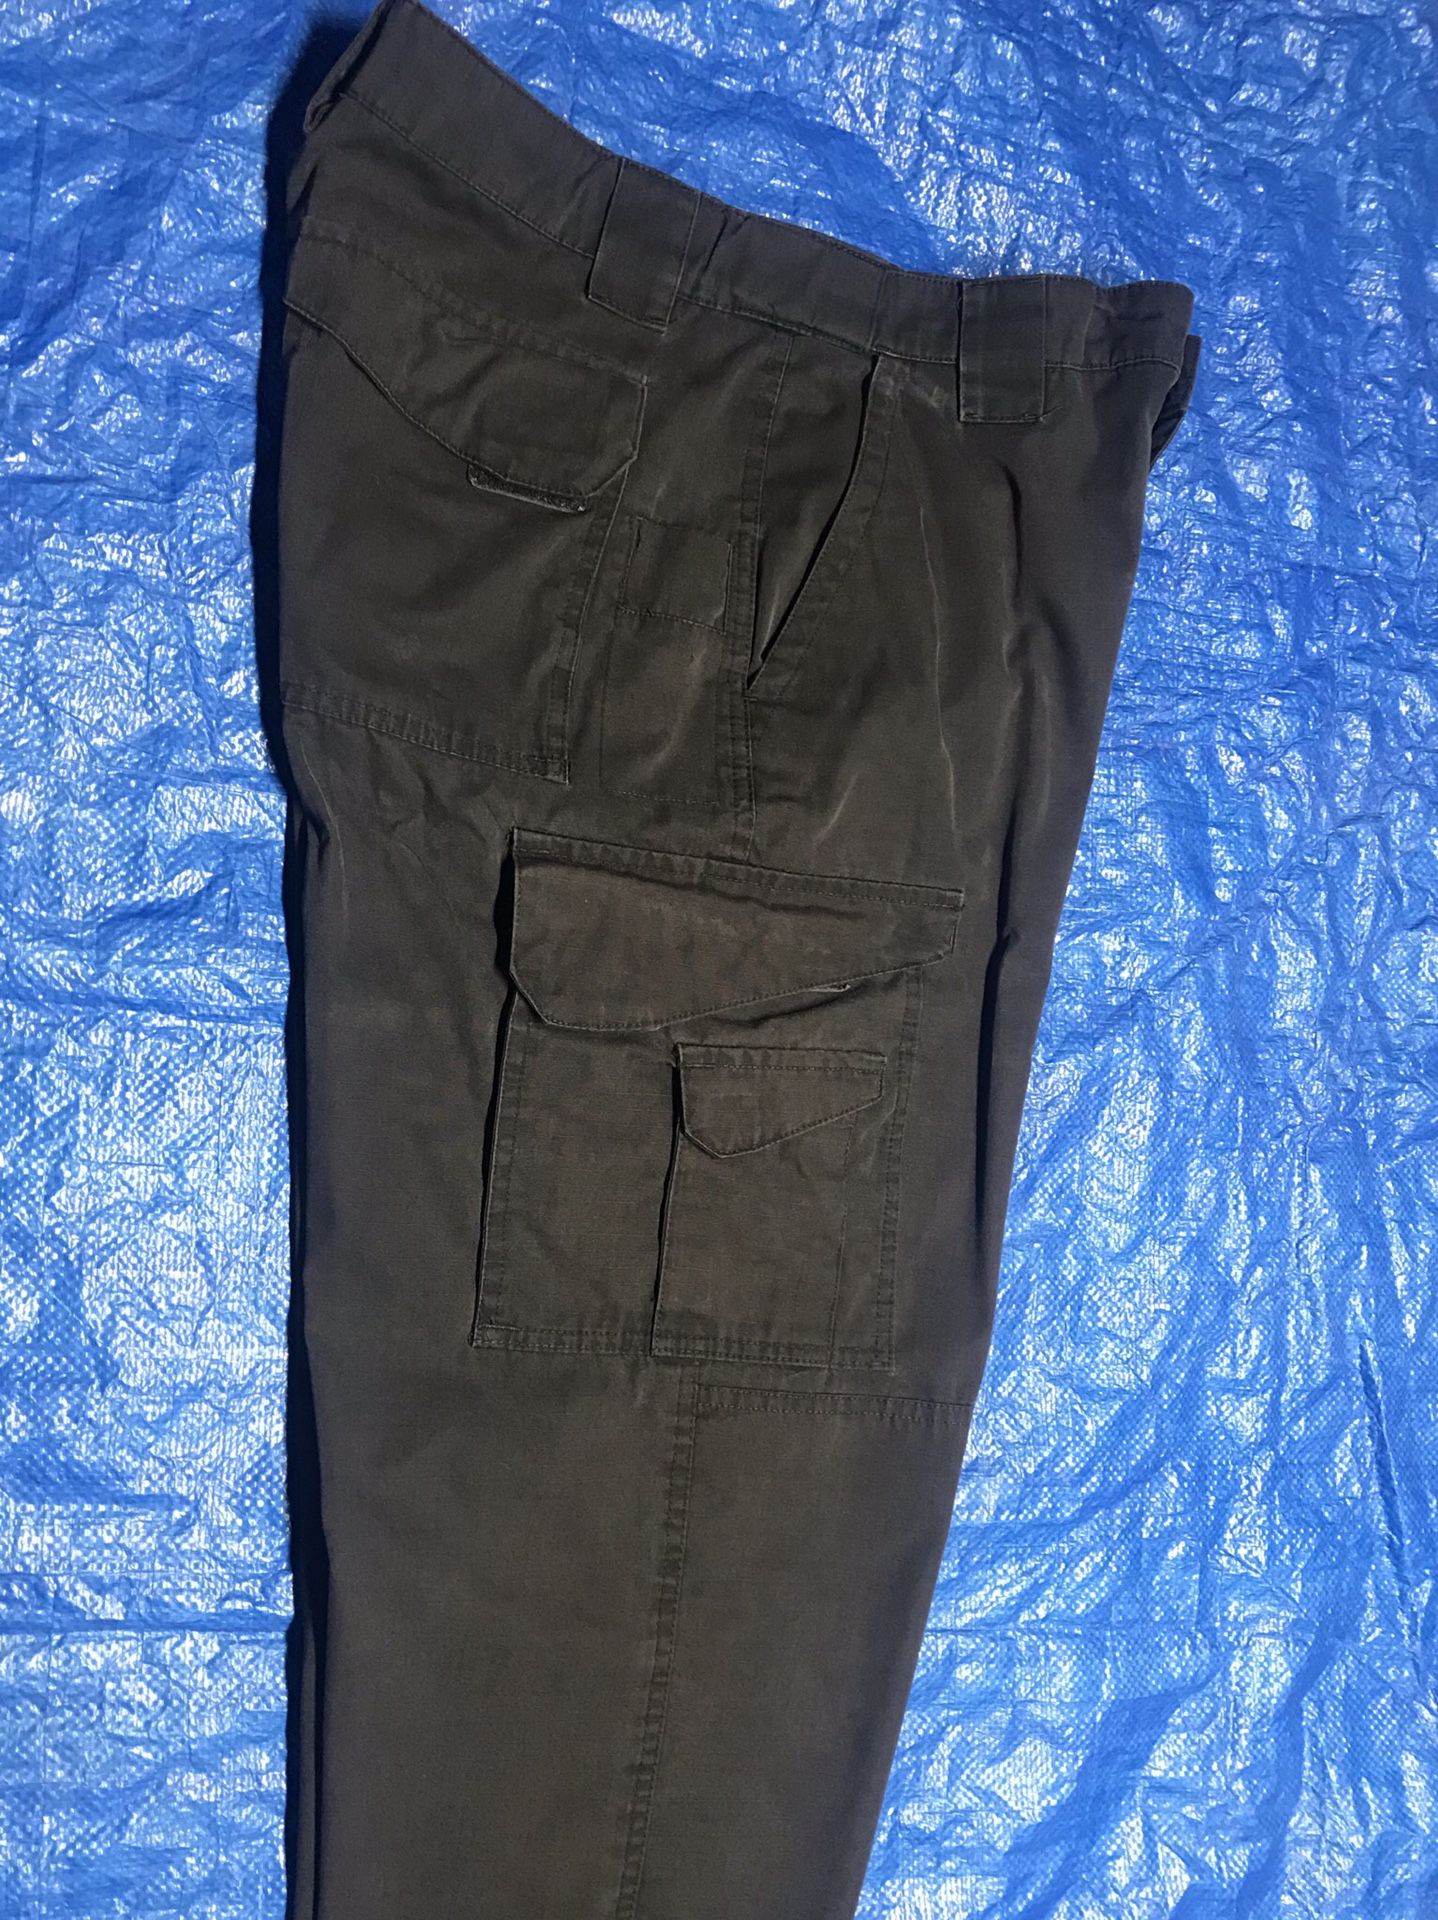 5.11 tactical pants for Sale in San Antonio, TX - OfferUp